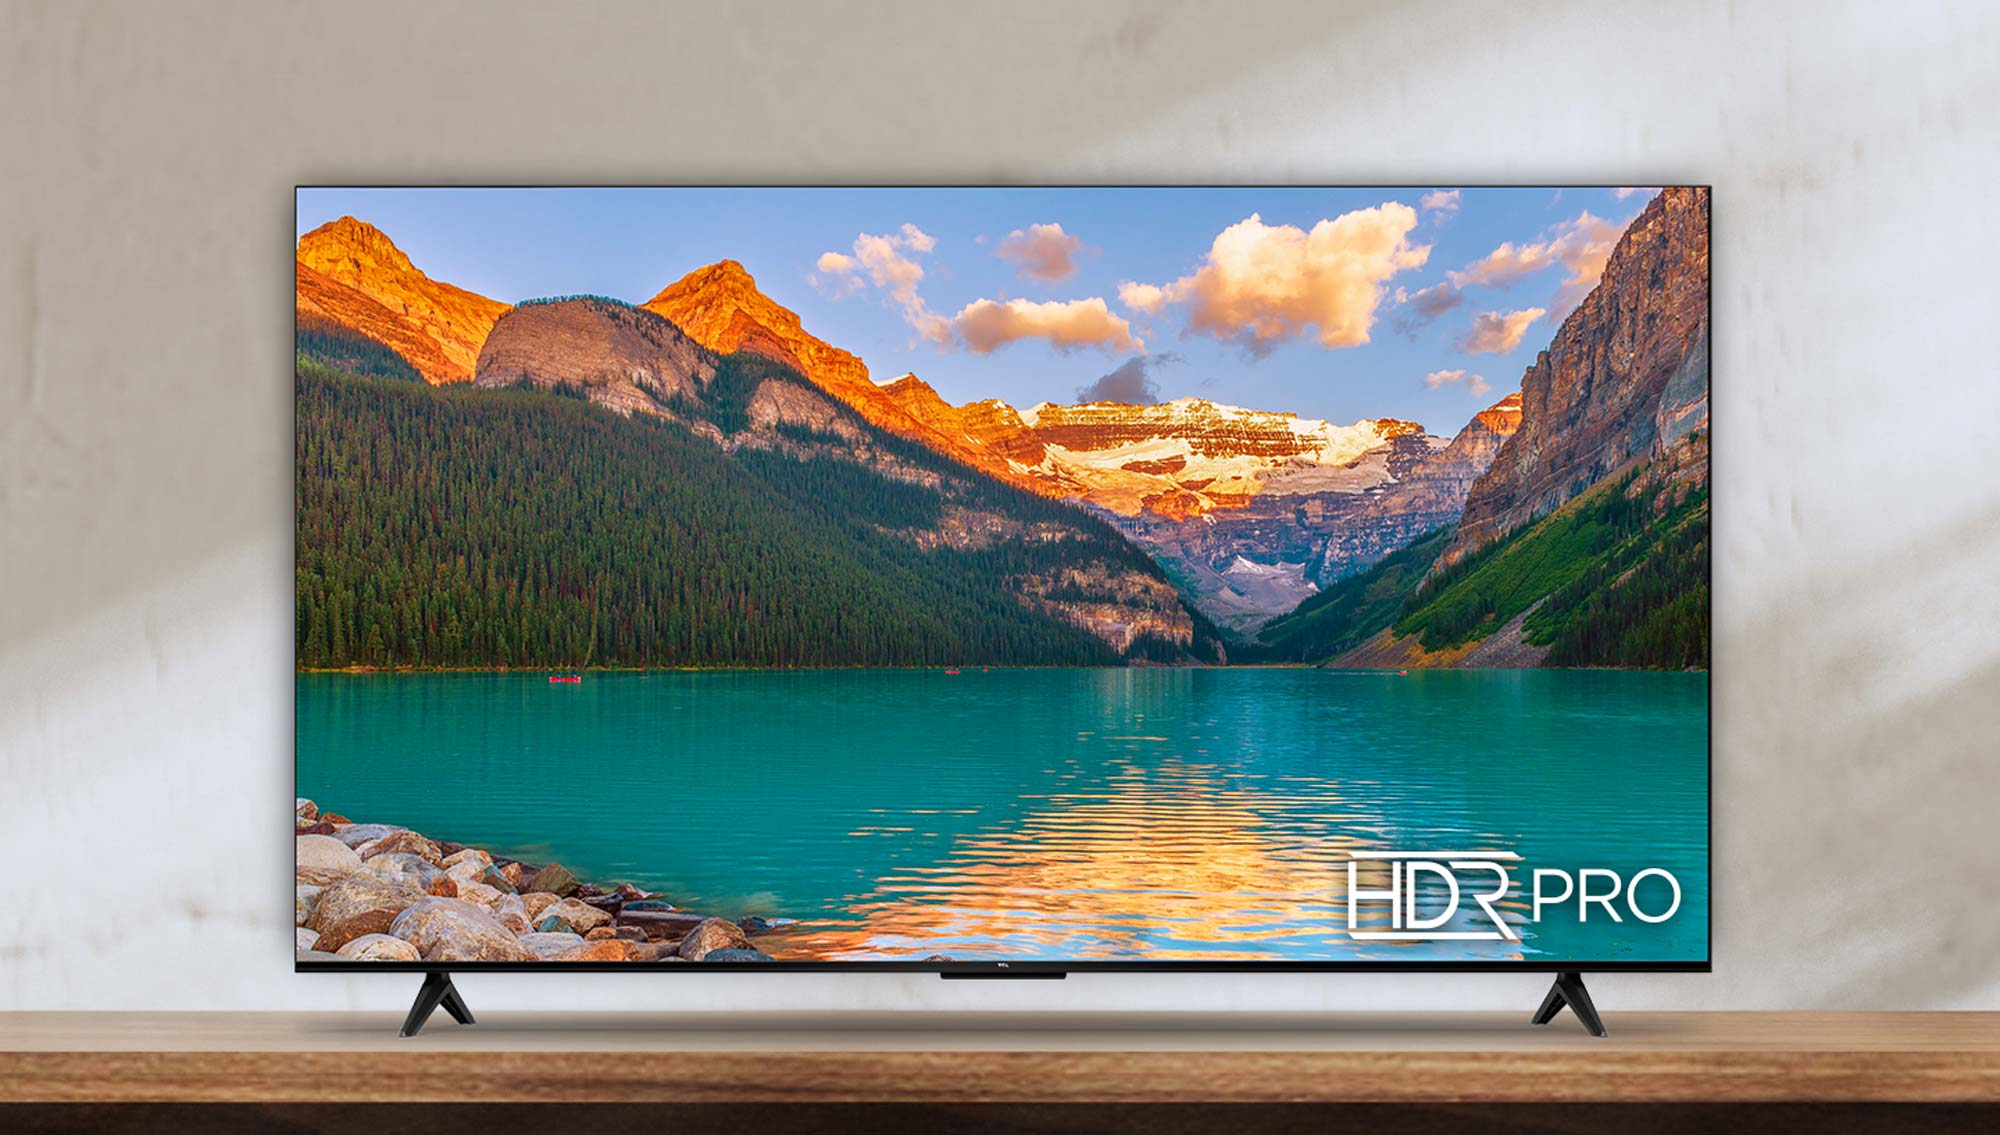 TCL S4 S-Class 4K TV (65S450G) review